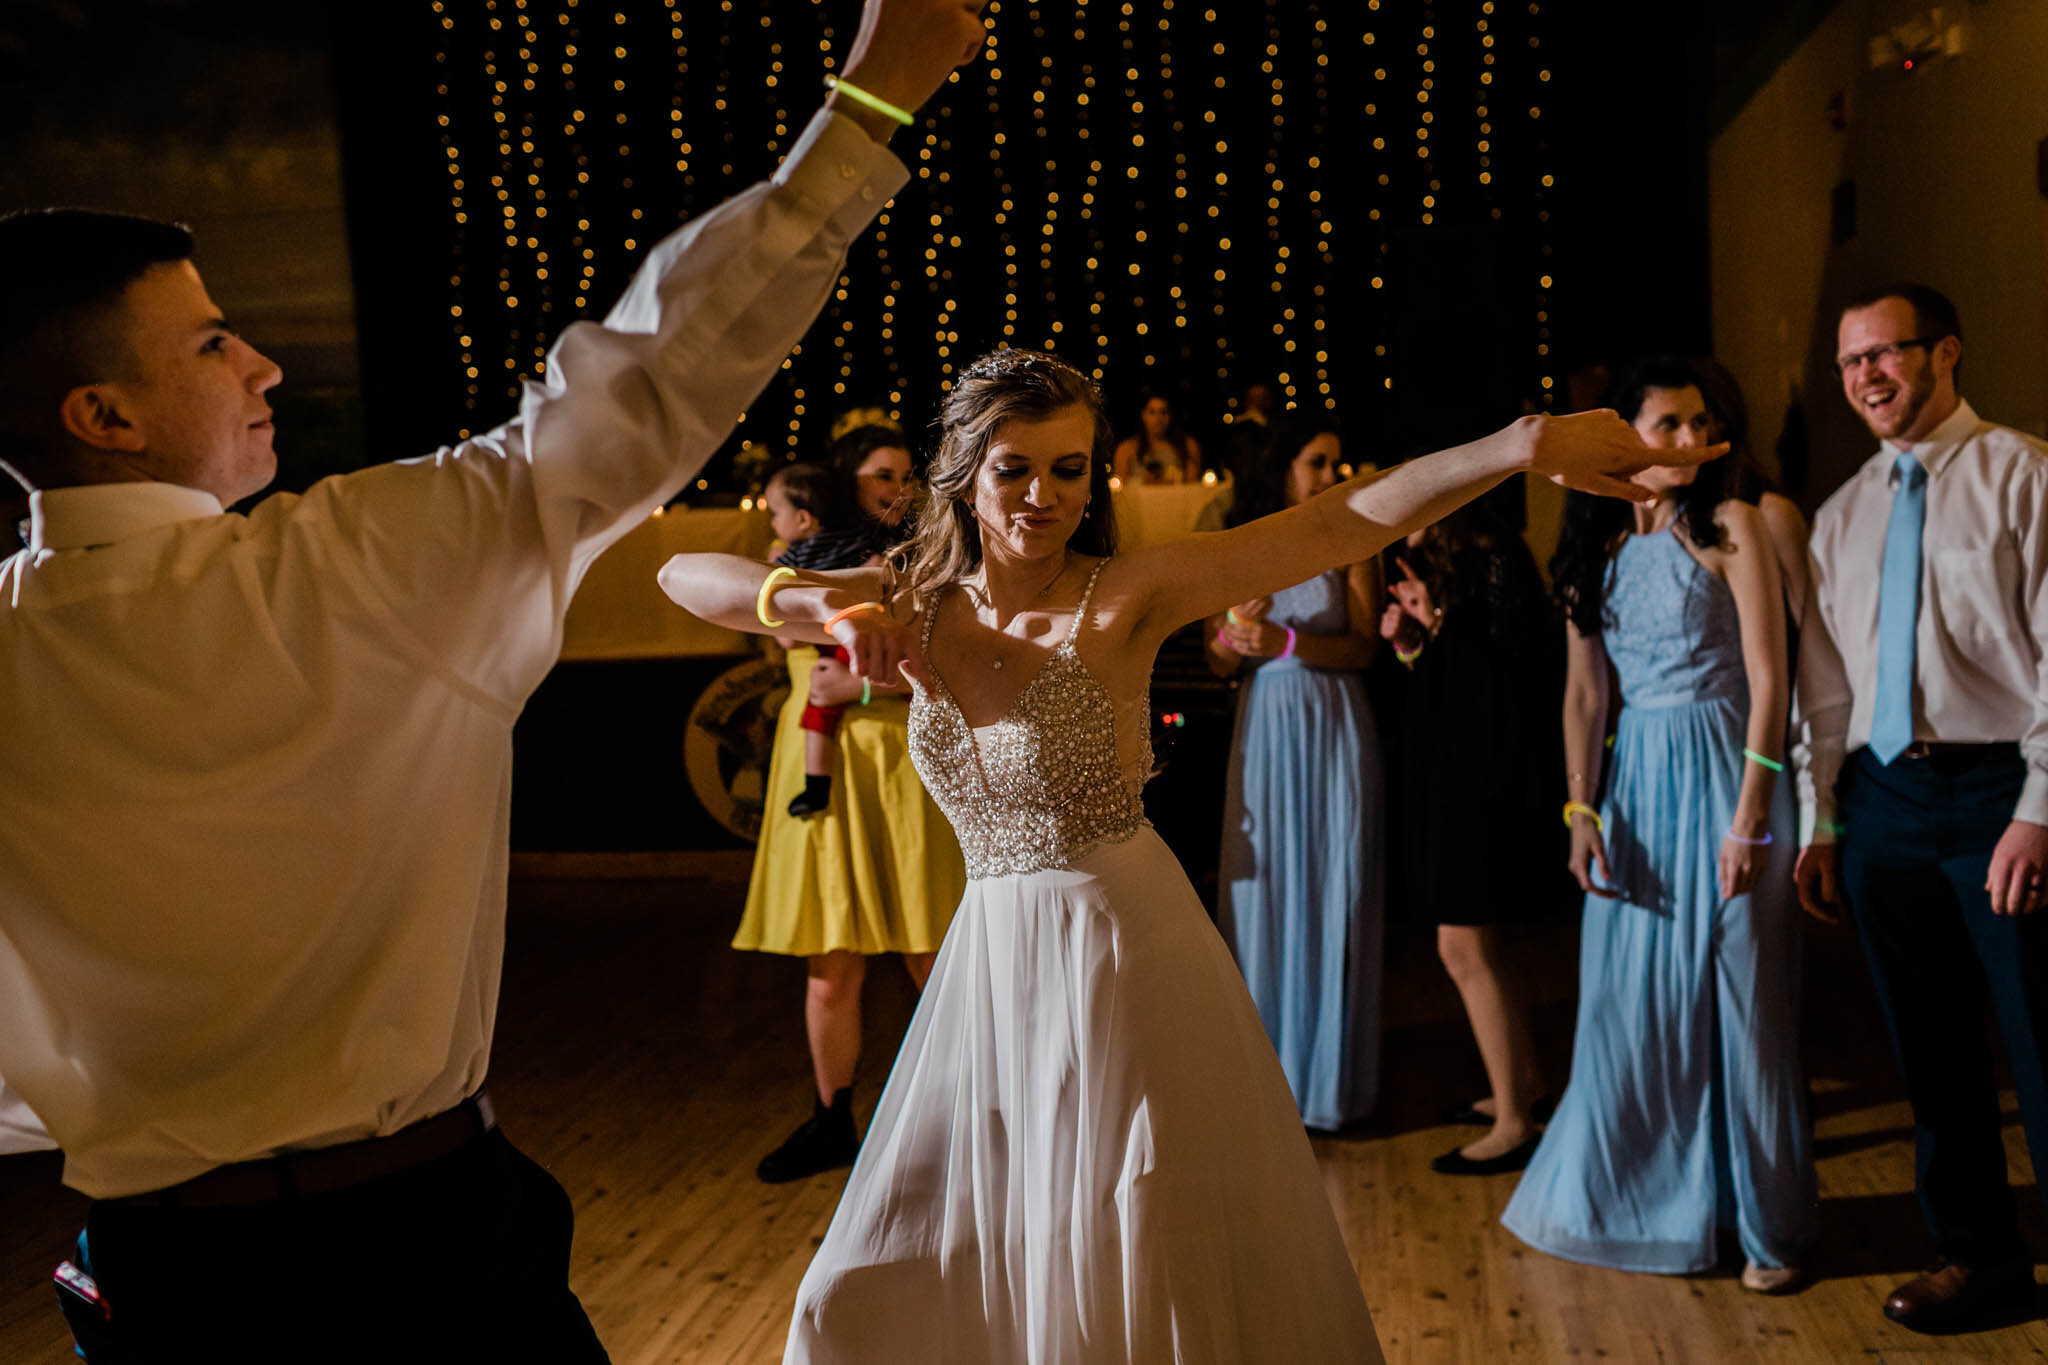 Durham Wedding Photographer | By G. Lin Photography | Bride dancing with guest